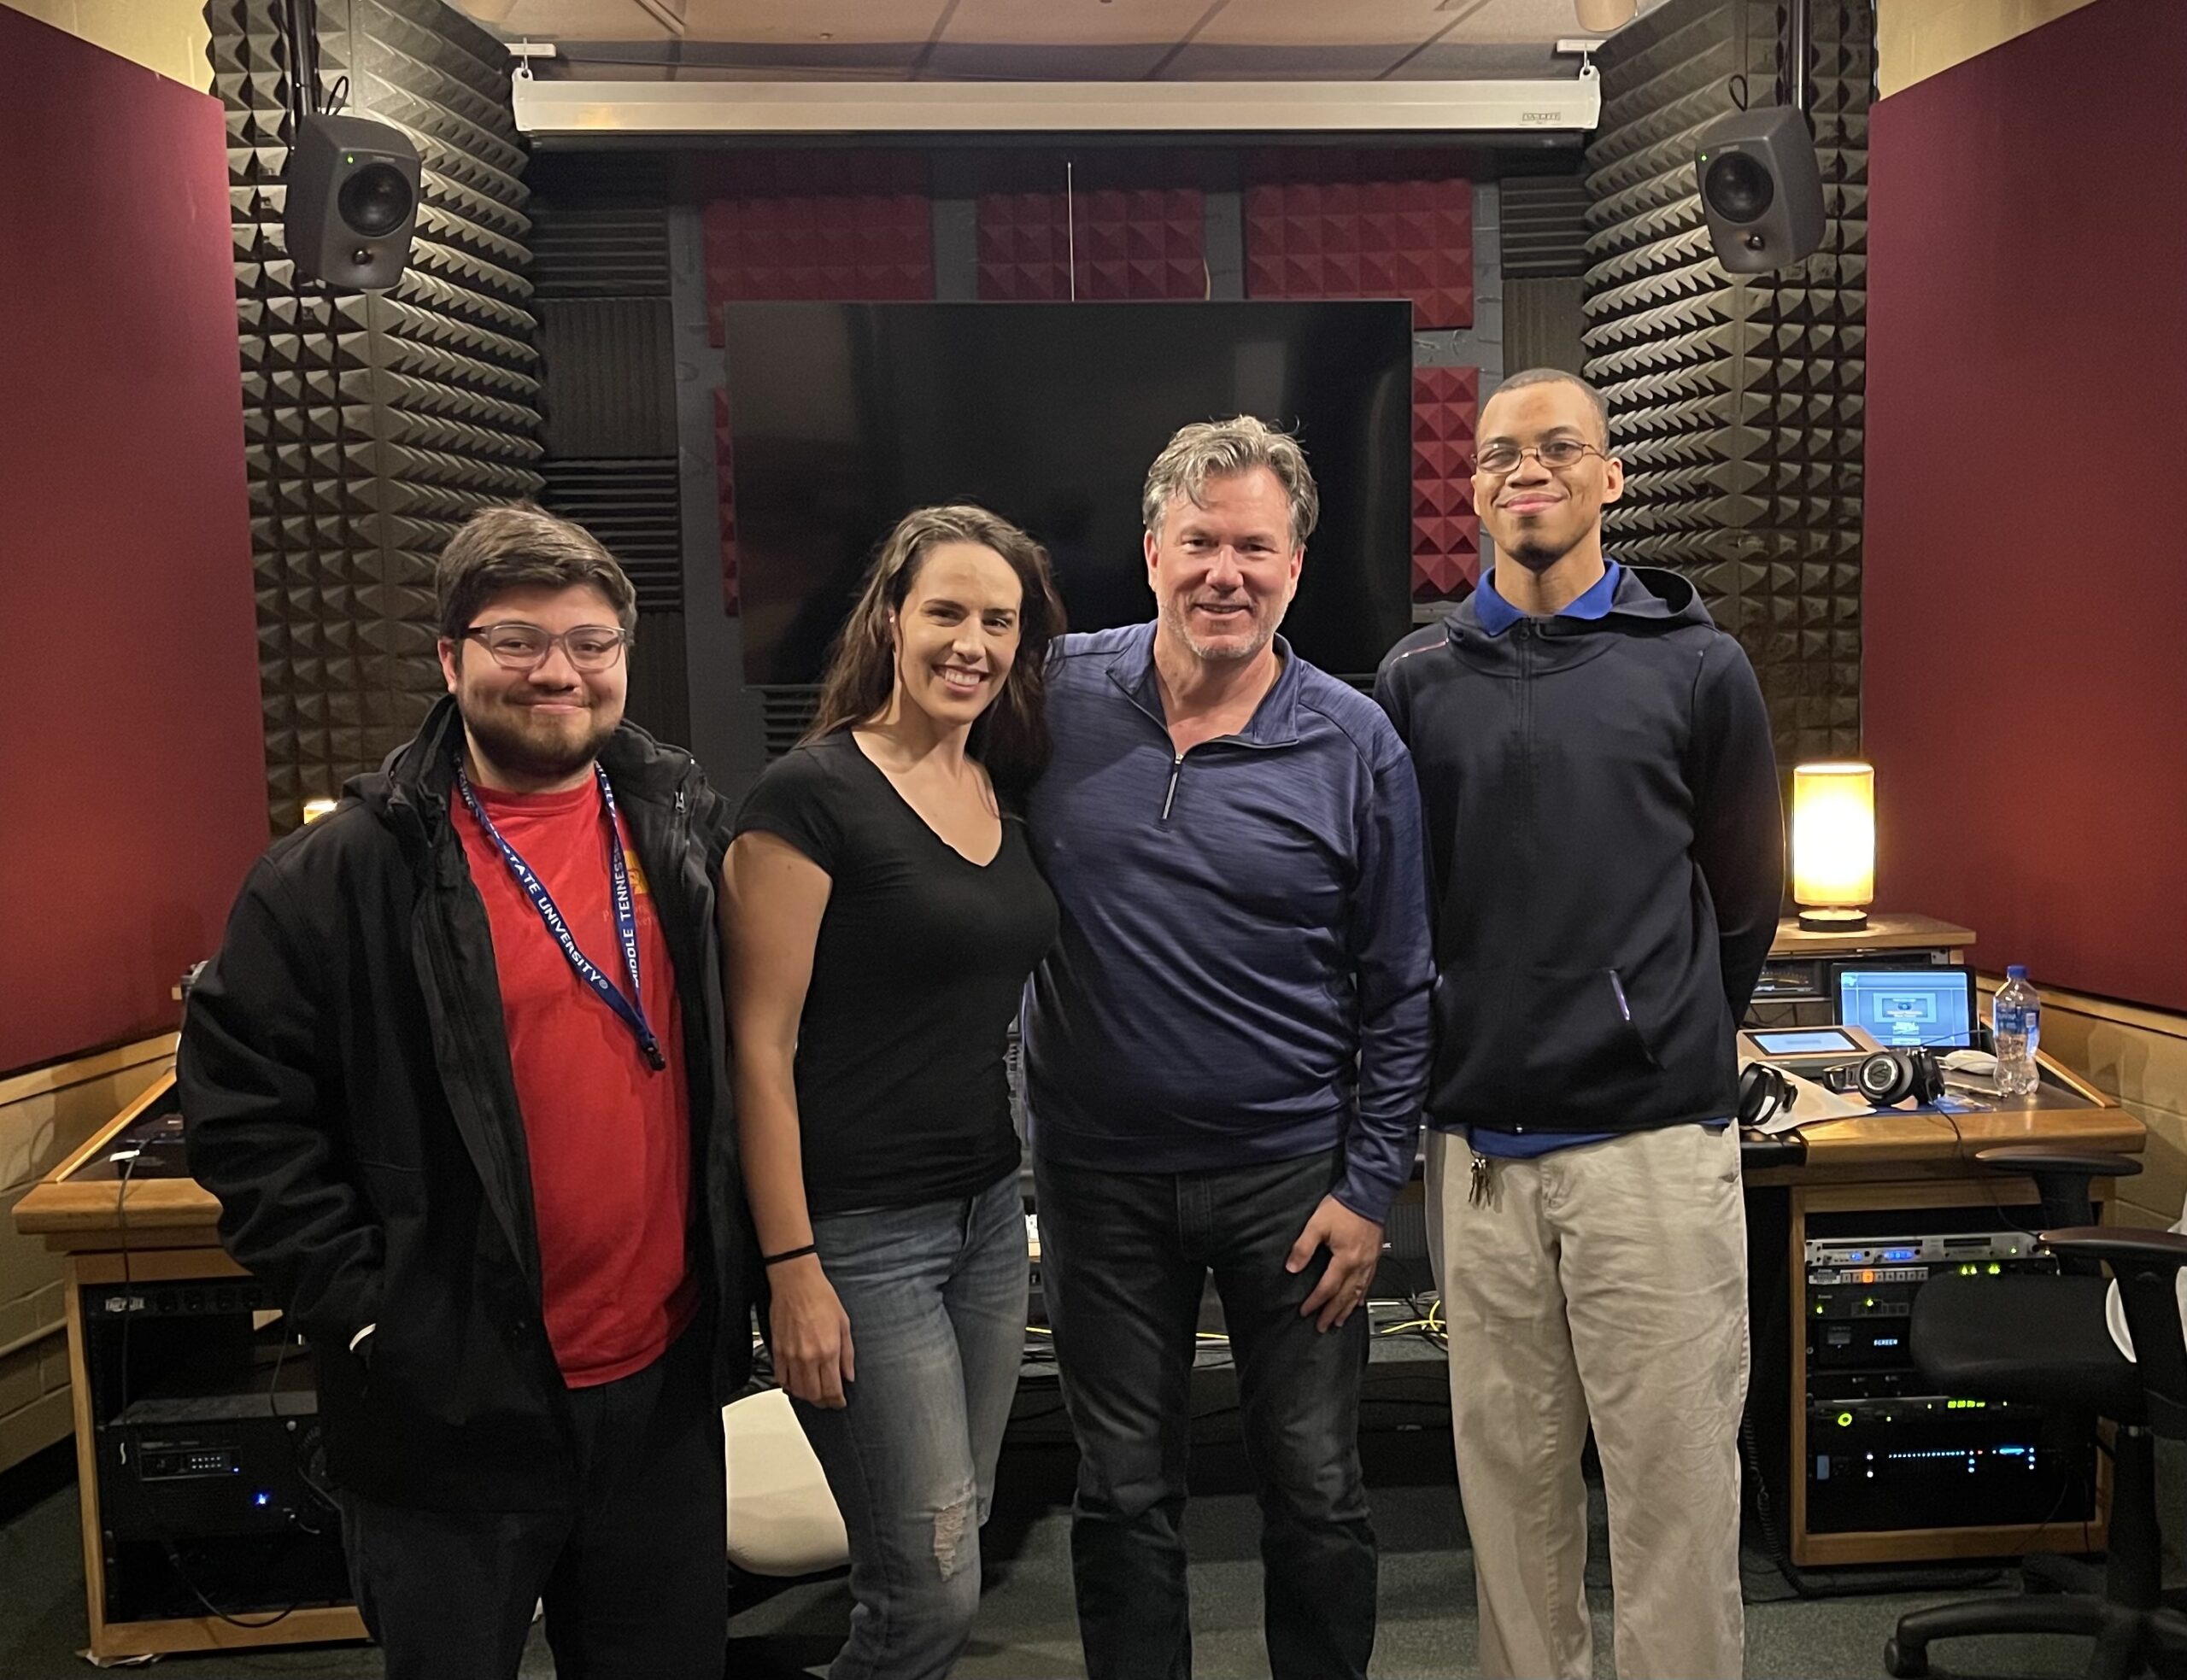 Kevin recording at Middle Tennessee State University with Shannon Scott and producers.